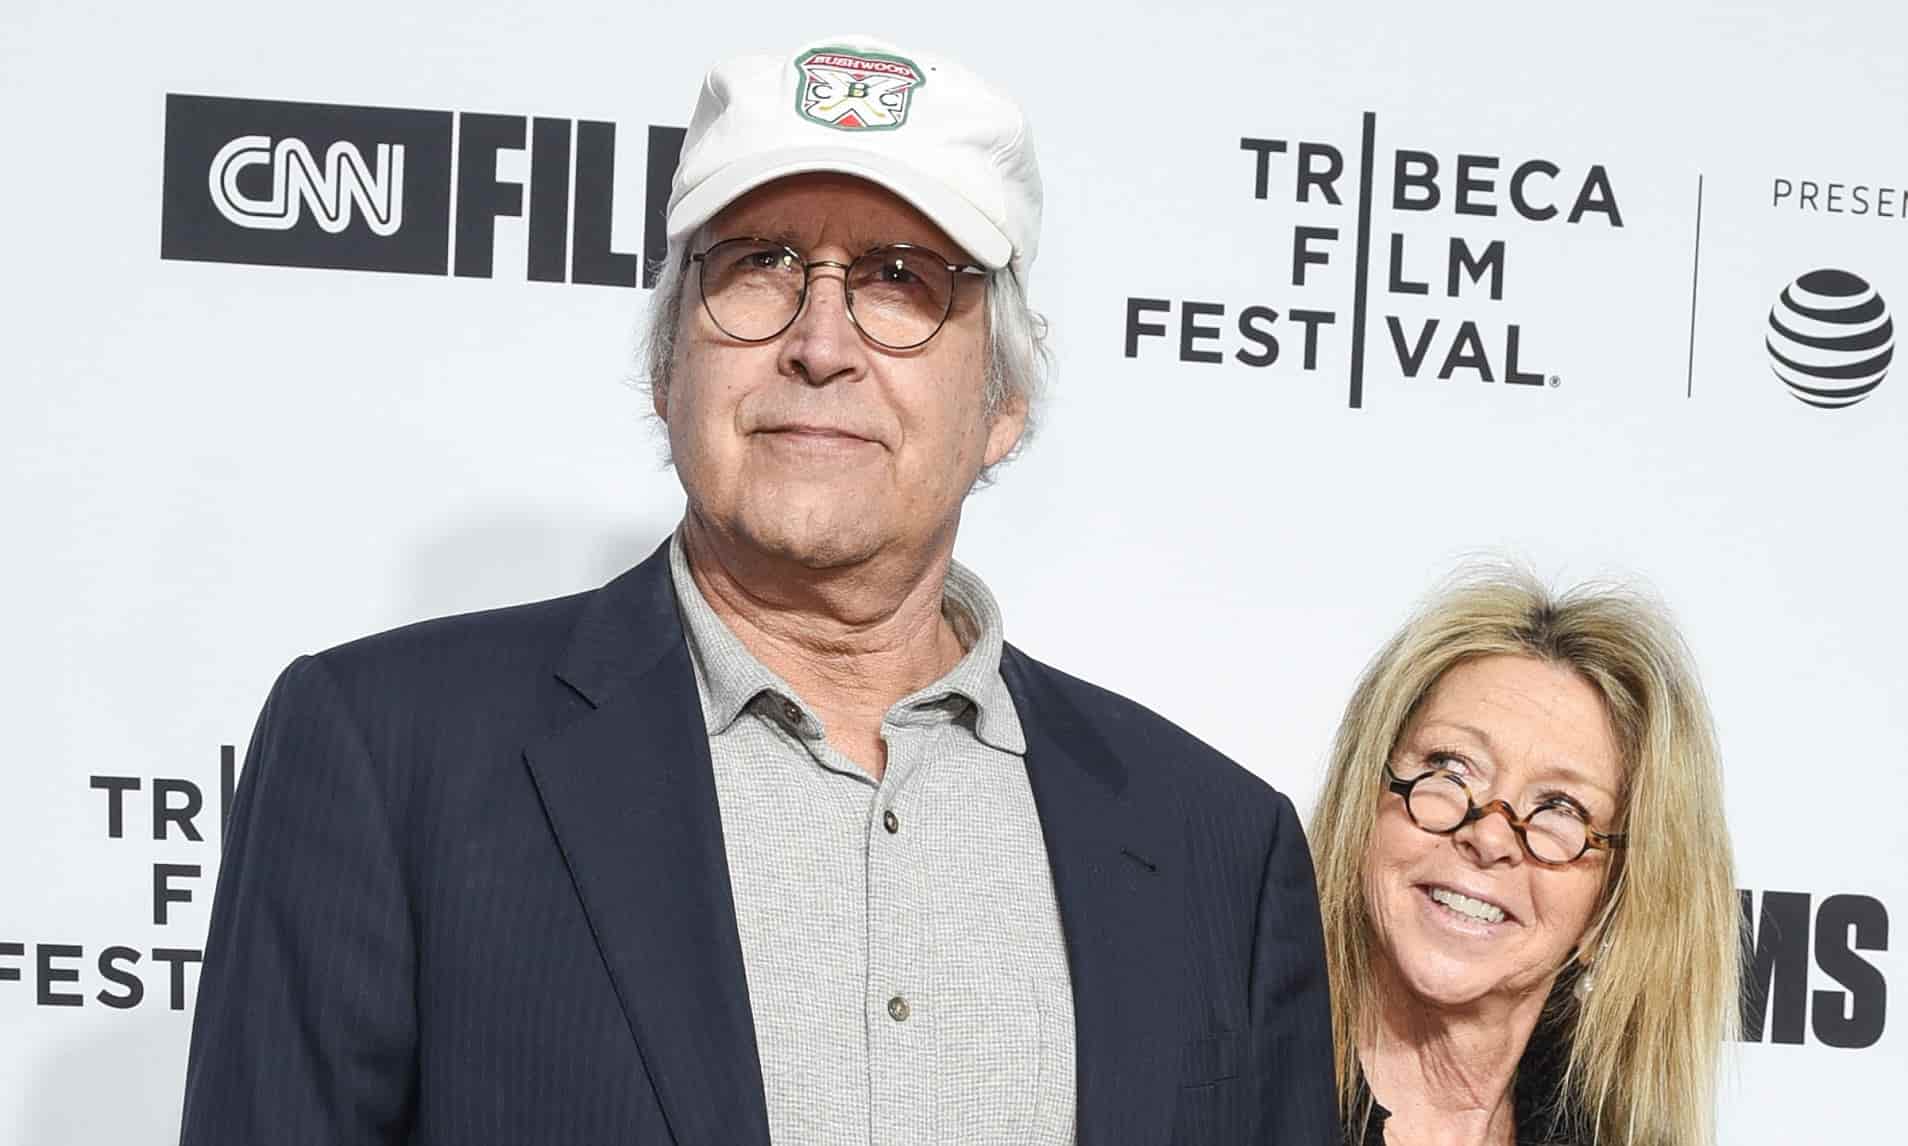 Image of Chevy Chase with his wife, Jayni Chase